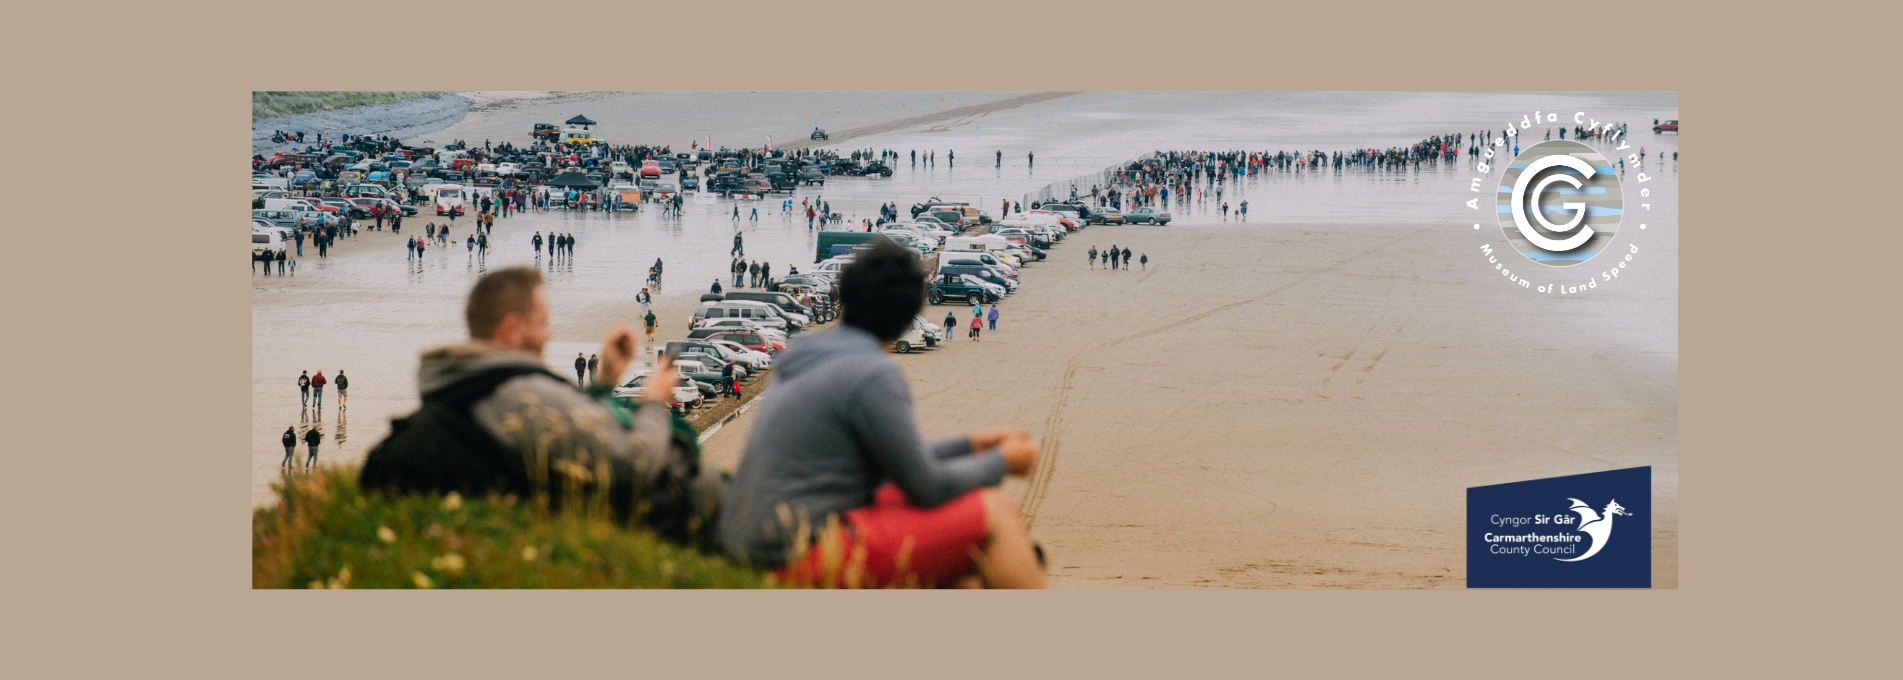 Two people watching the Vintage Hot Rods gather on Pendine Sands